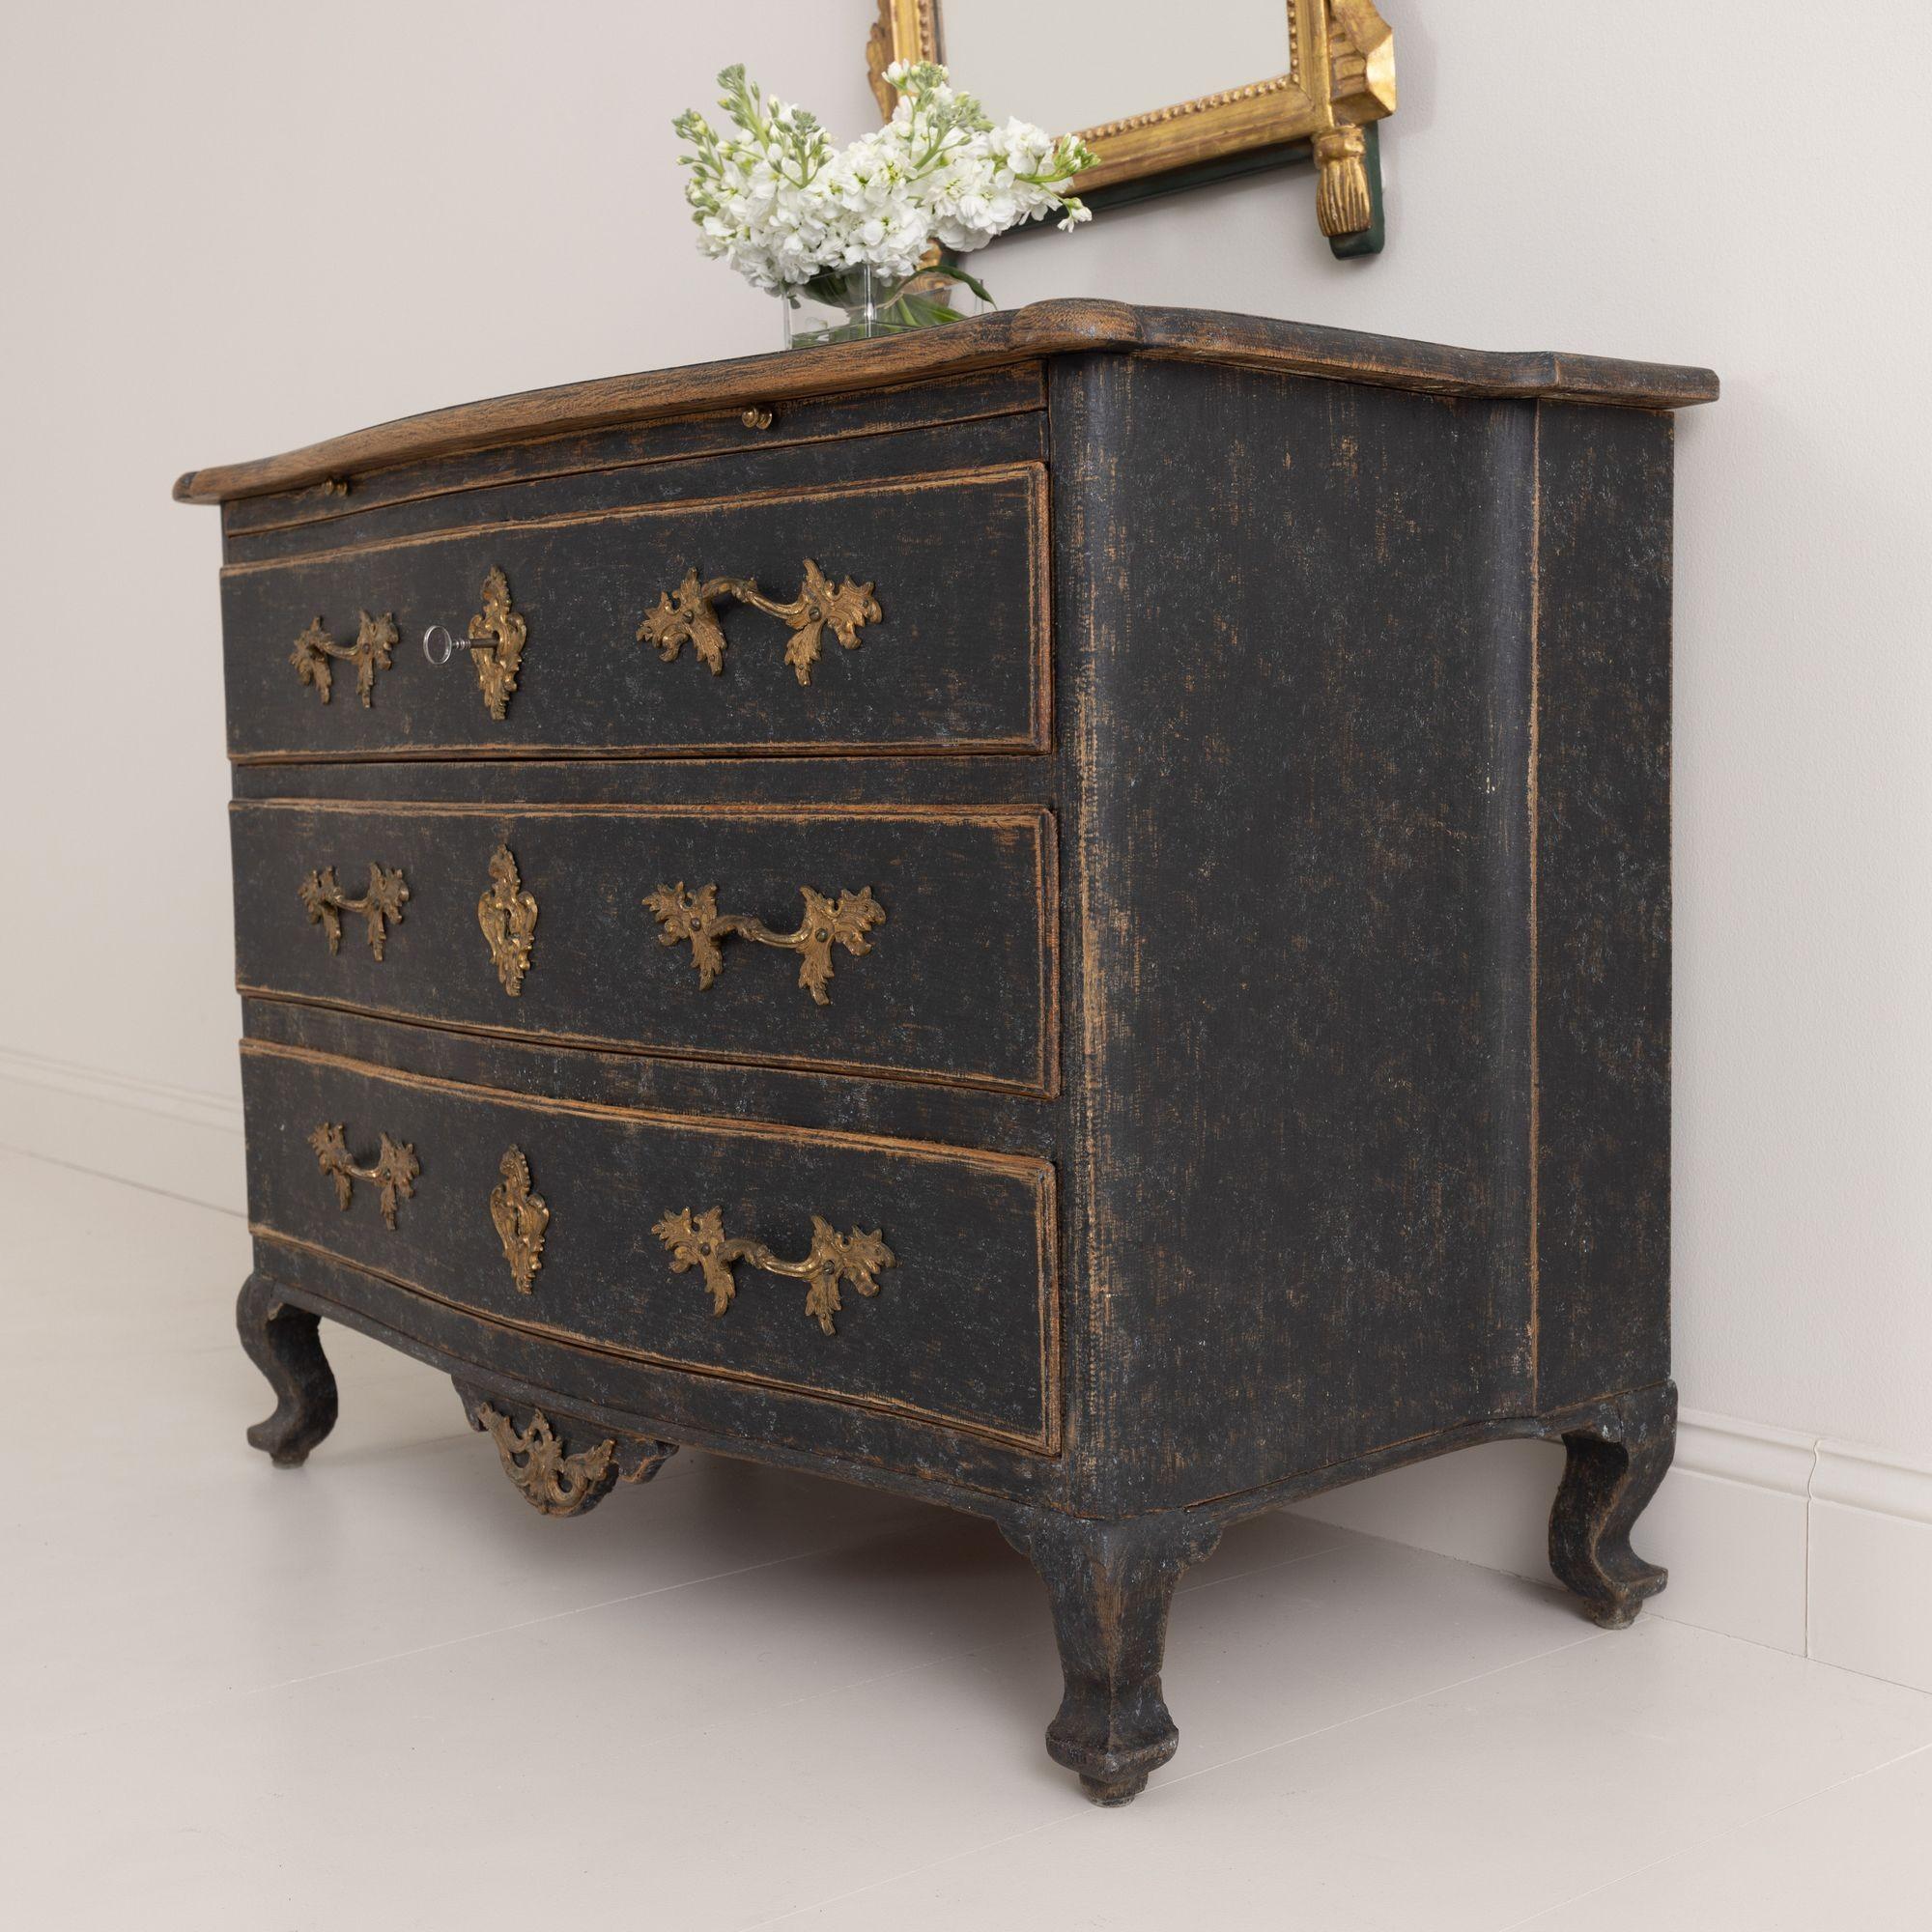 18th C. Swedish Rococo Period Black Painted Commode with Original Brass Hardware For Sale 2